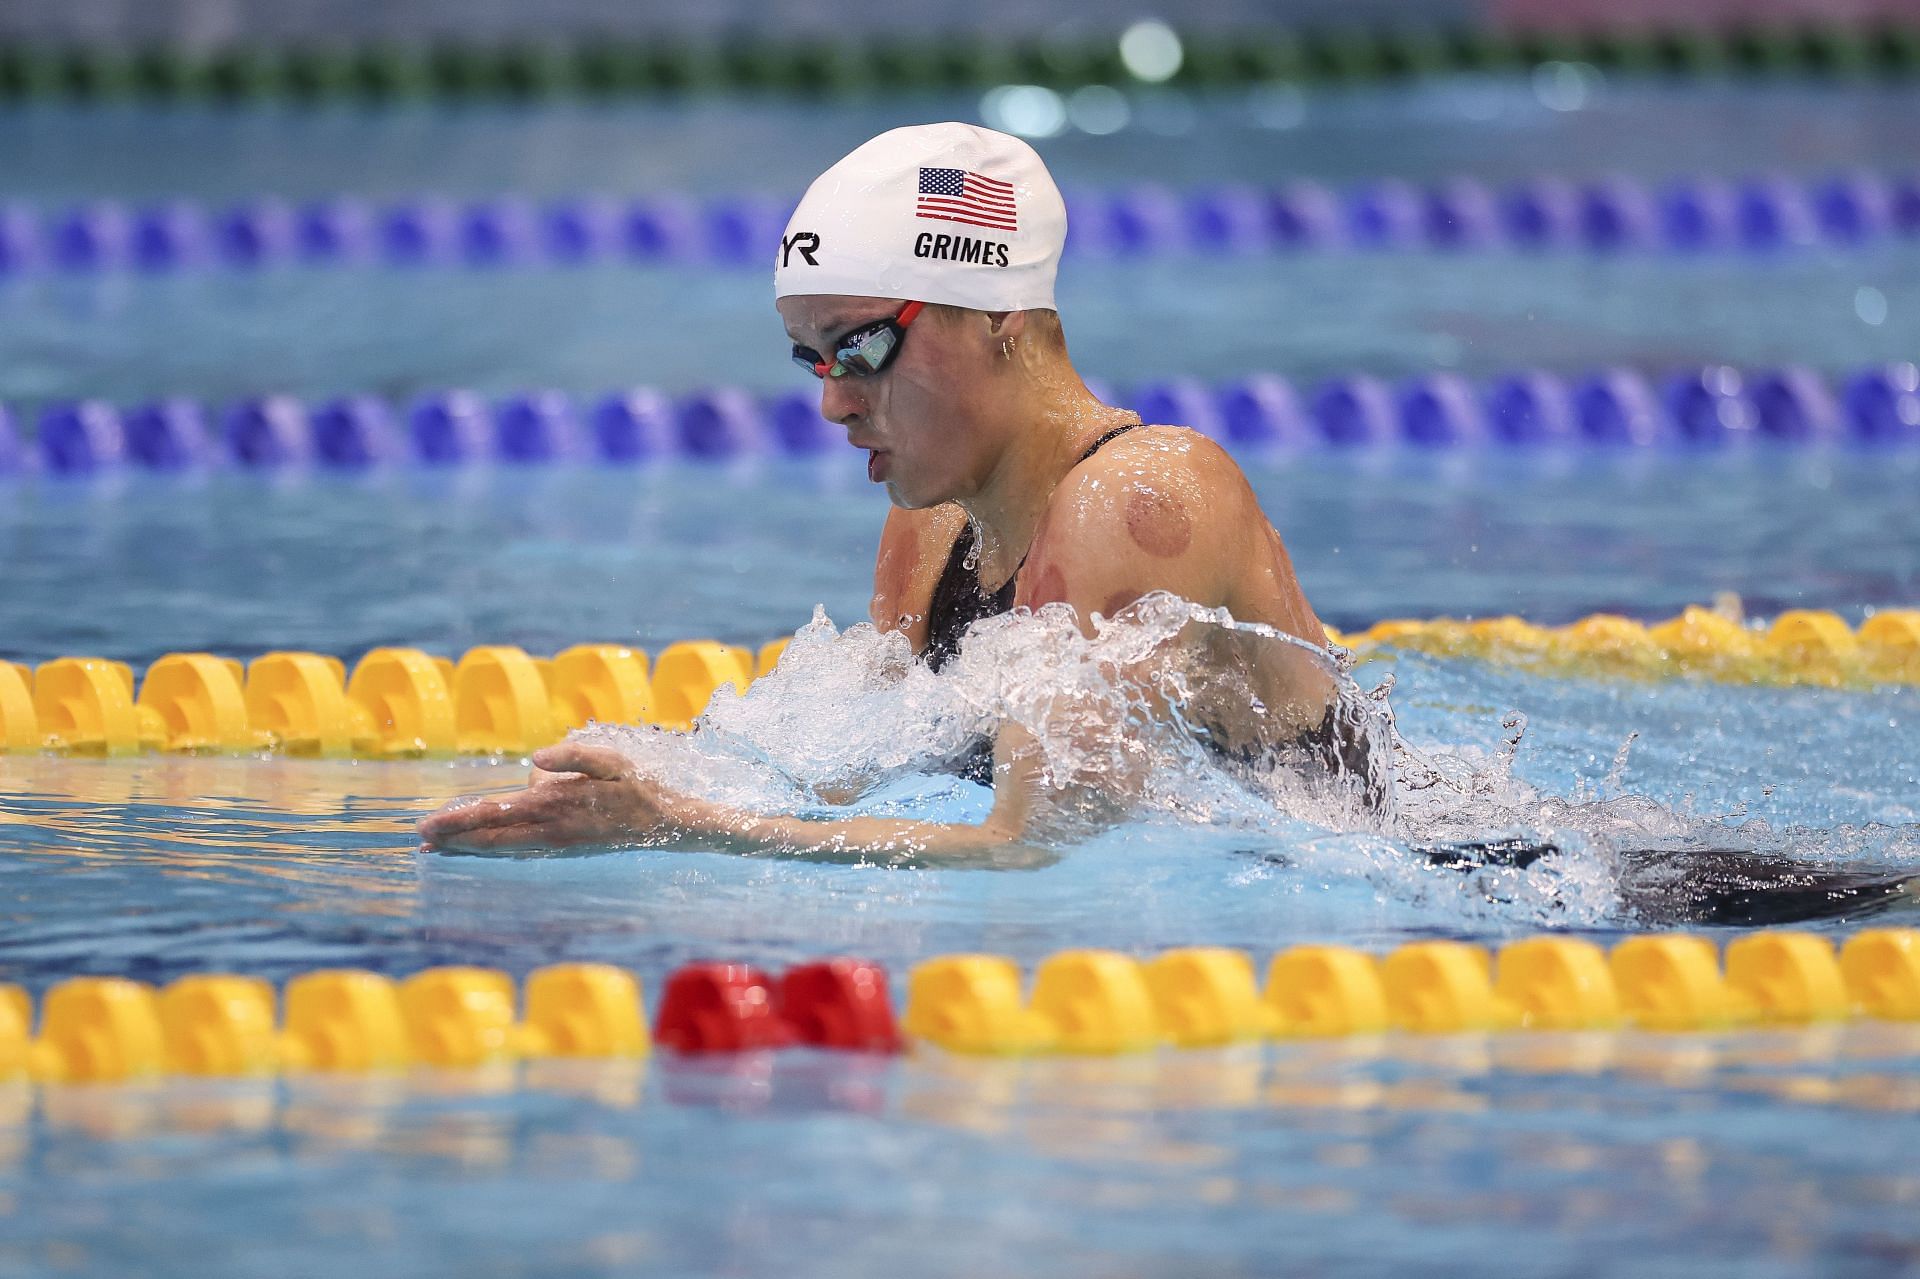 Katie Grimes competes at 400m Women Individual Medley during the 2023 World Aquatics Swimming World Cup 2023 - Meet 1 in Berlin, Germany.